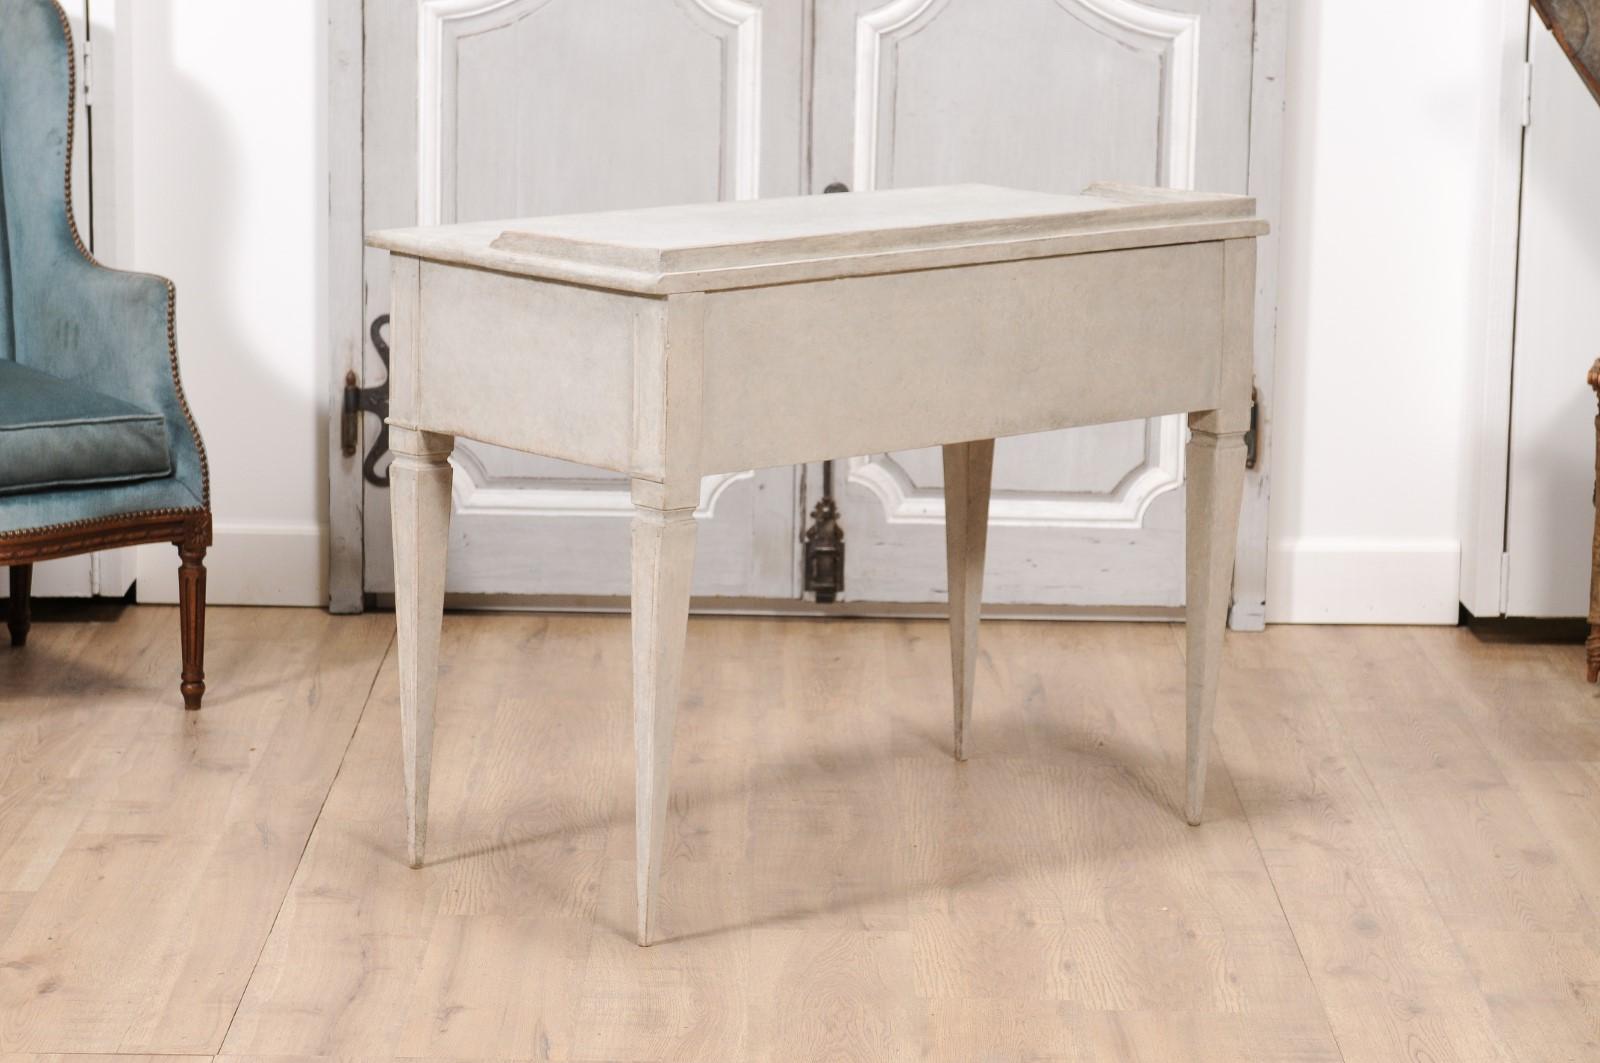 1880s Swedish Gustavian Style Painted Desk with Five Drawers and Tapered Legs For Sale 3